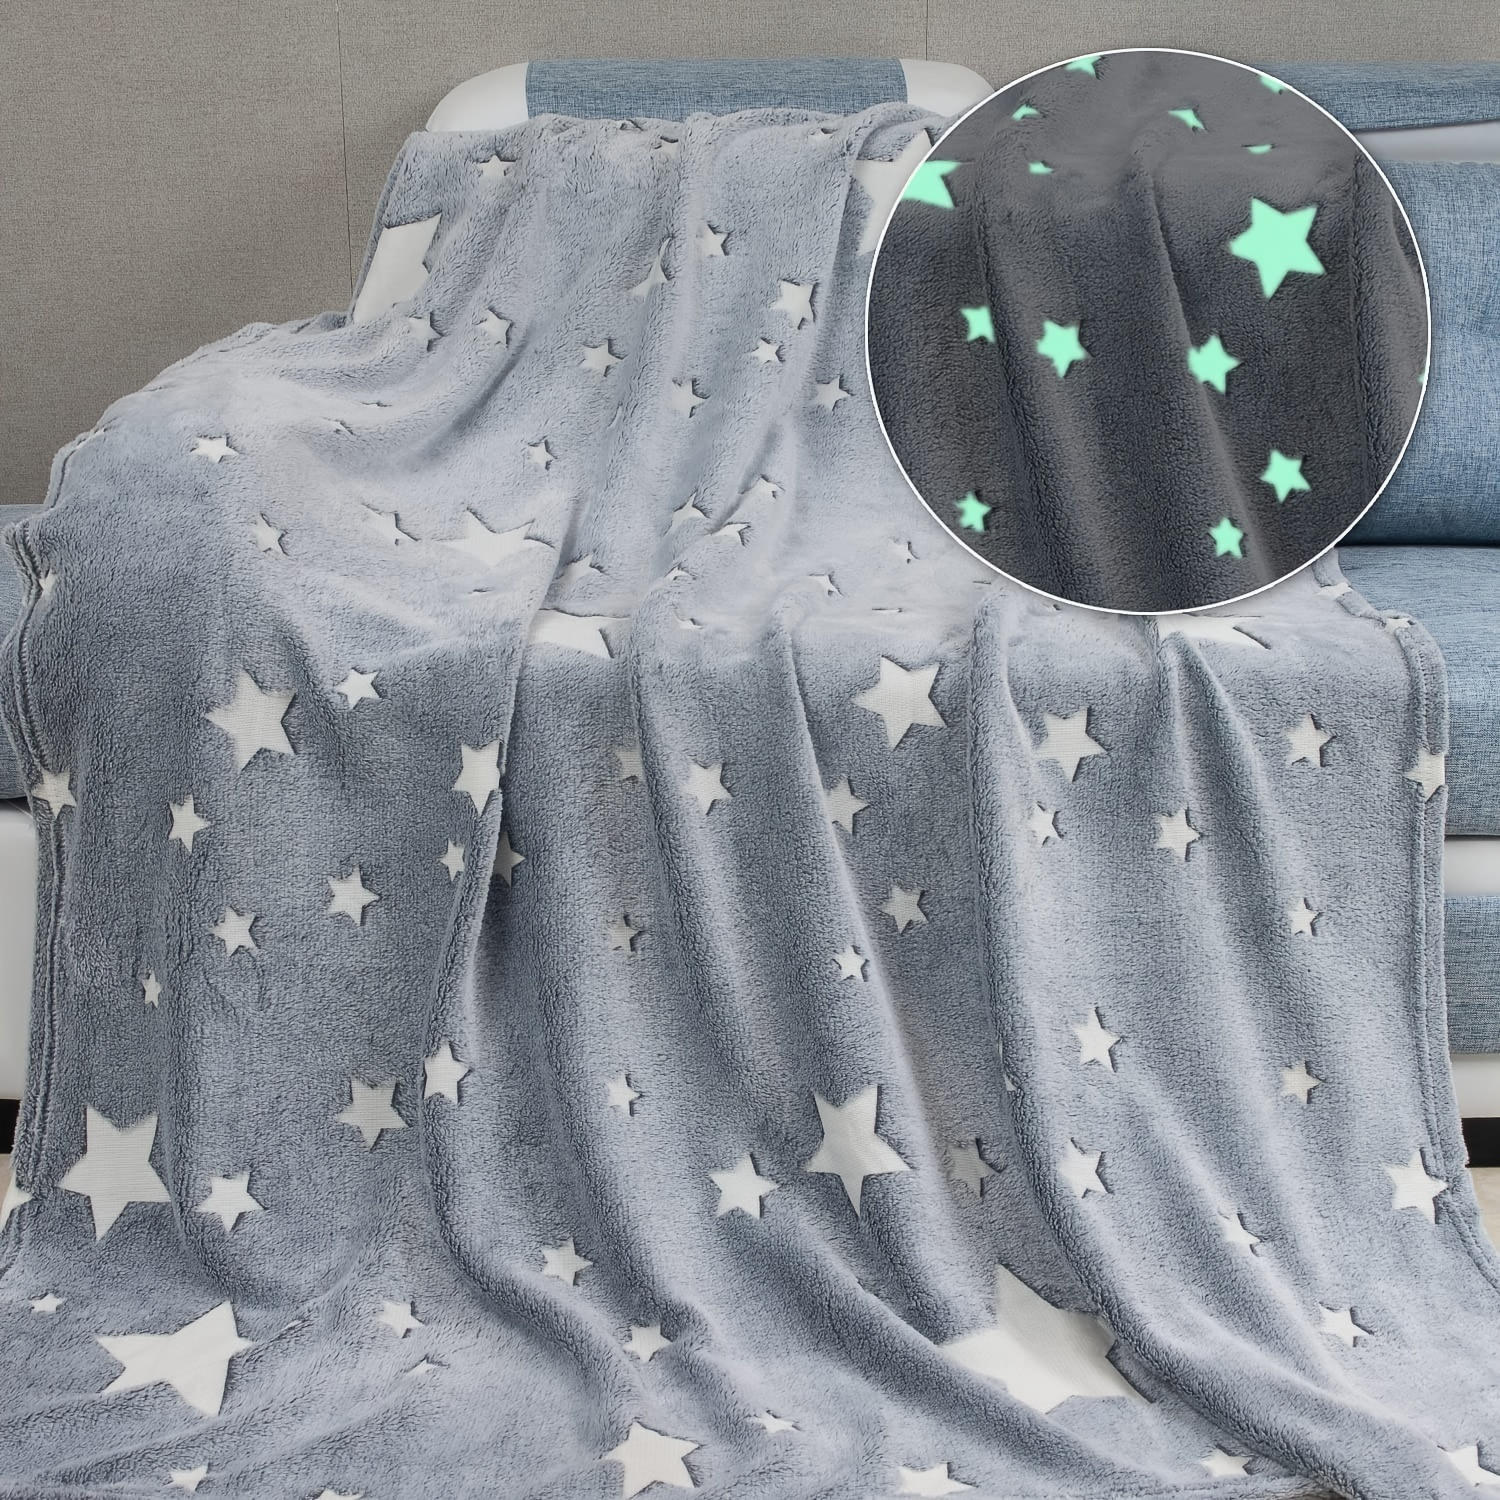 

Mother's Day Gifts For Kids: Unicorn Glow-in-the-dark Blankets For Girls - Soft Kids Blankets For 1-10 Year Olds!